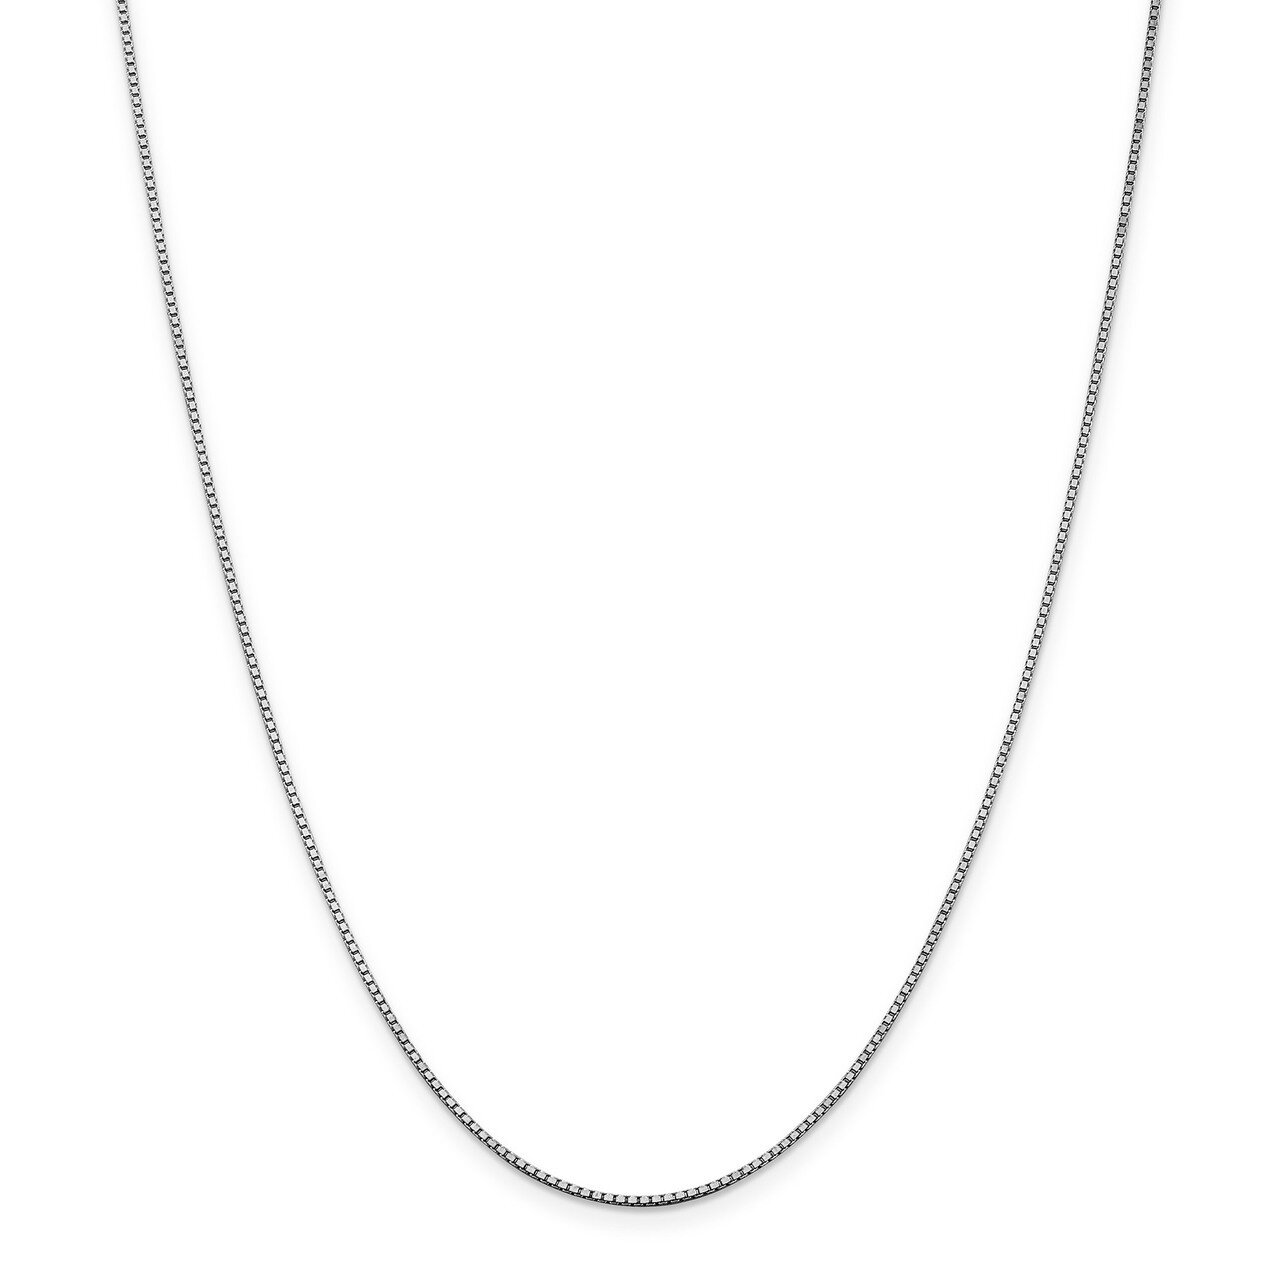 1.2 mm Box with Lobster Chain 18 Inch 14K White Gold HB-7162-18